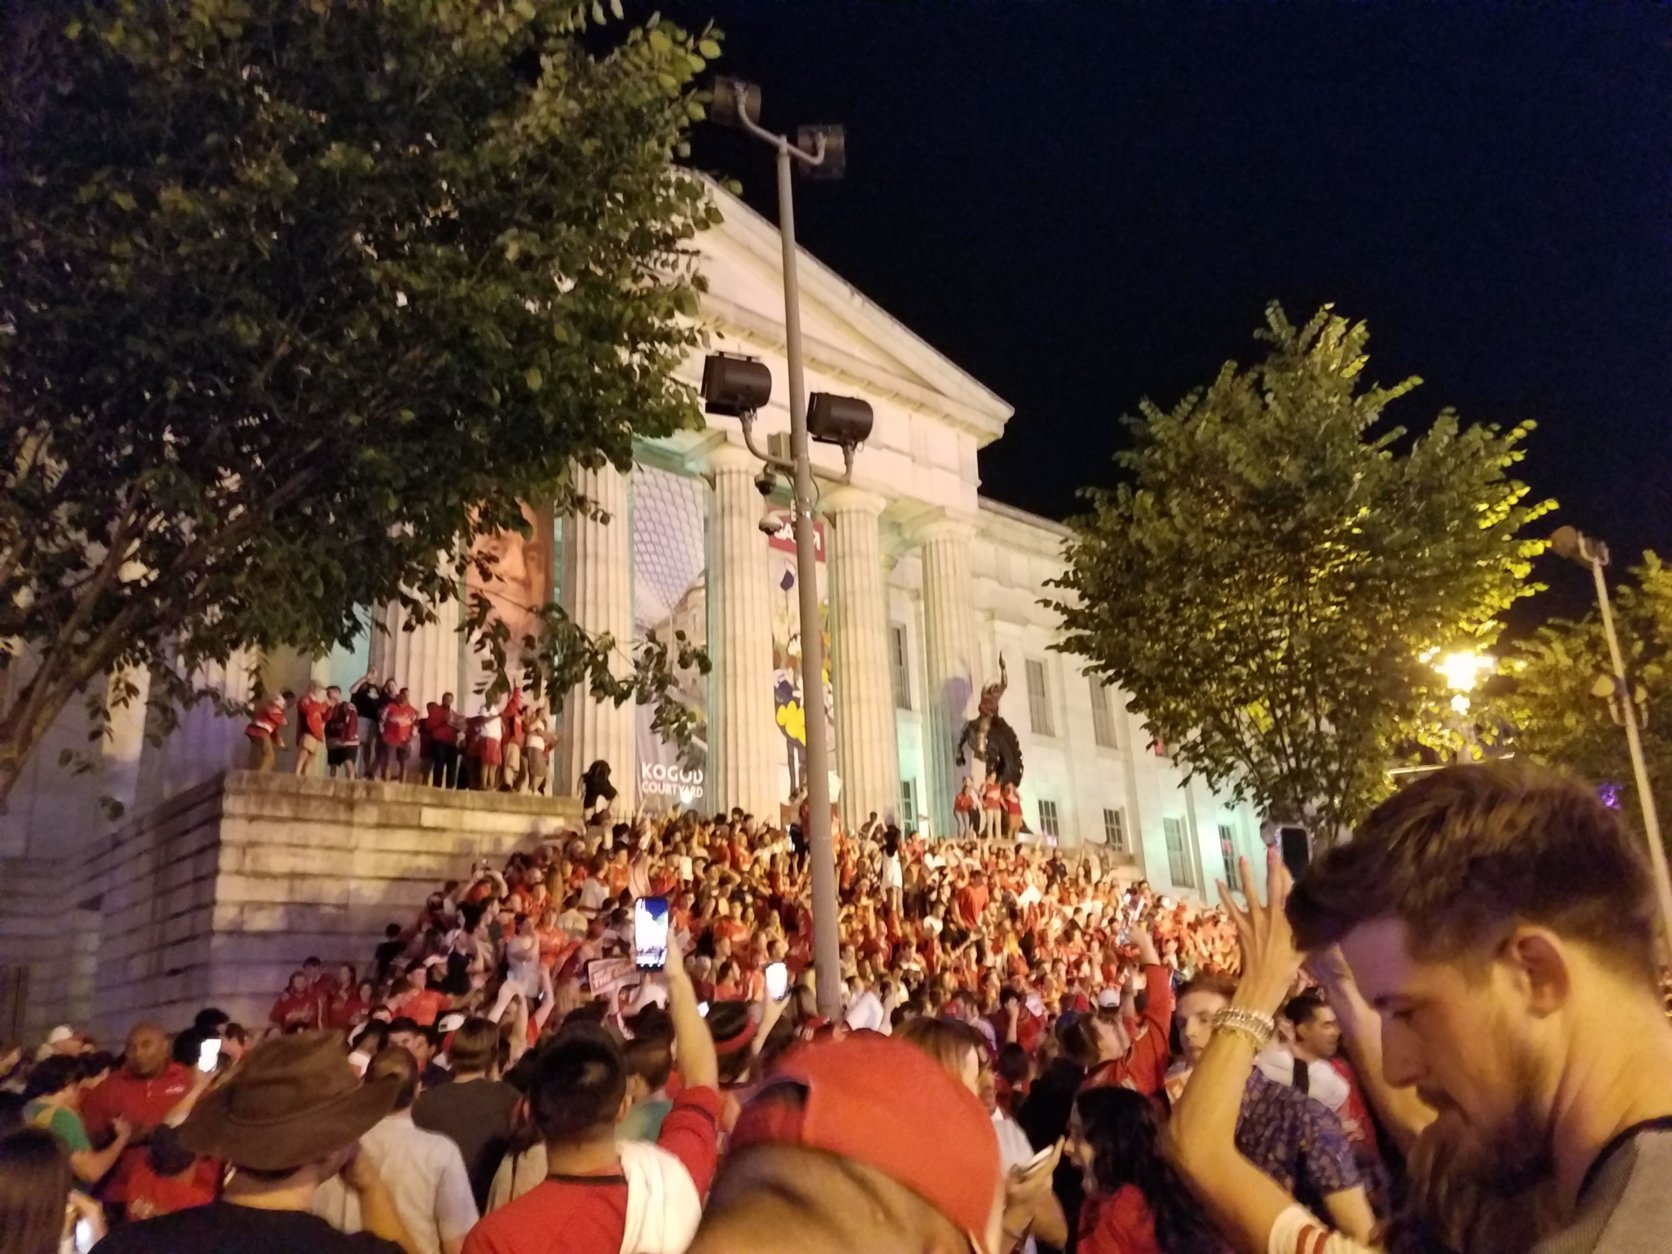 Capitals fans celebrate Washington's first Stanley Cup title in D.C. -  Sports Illustrated